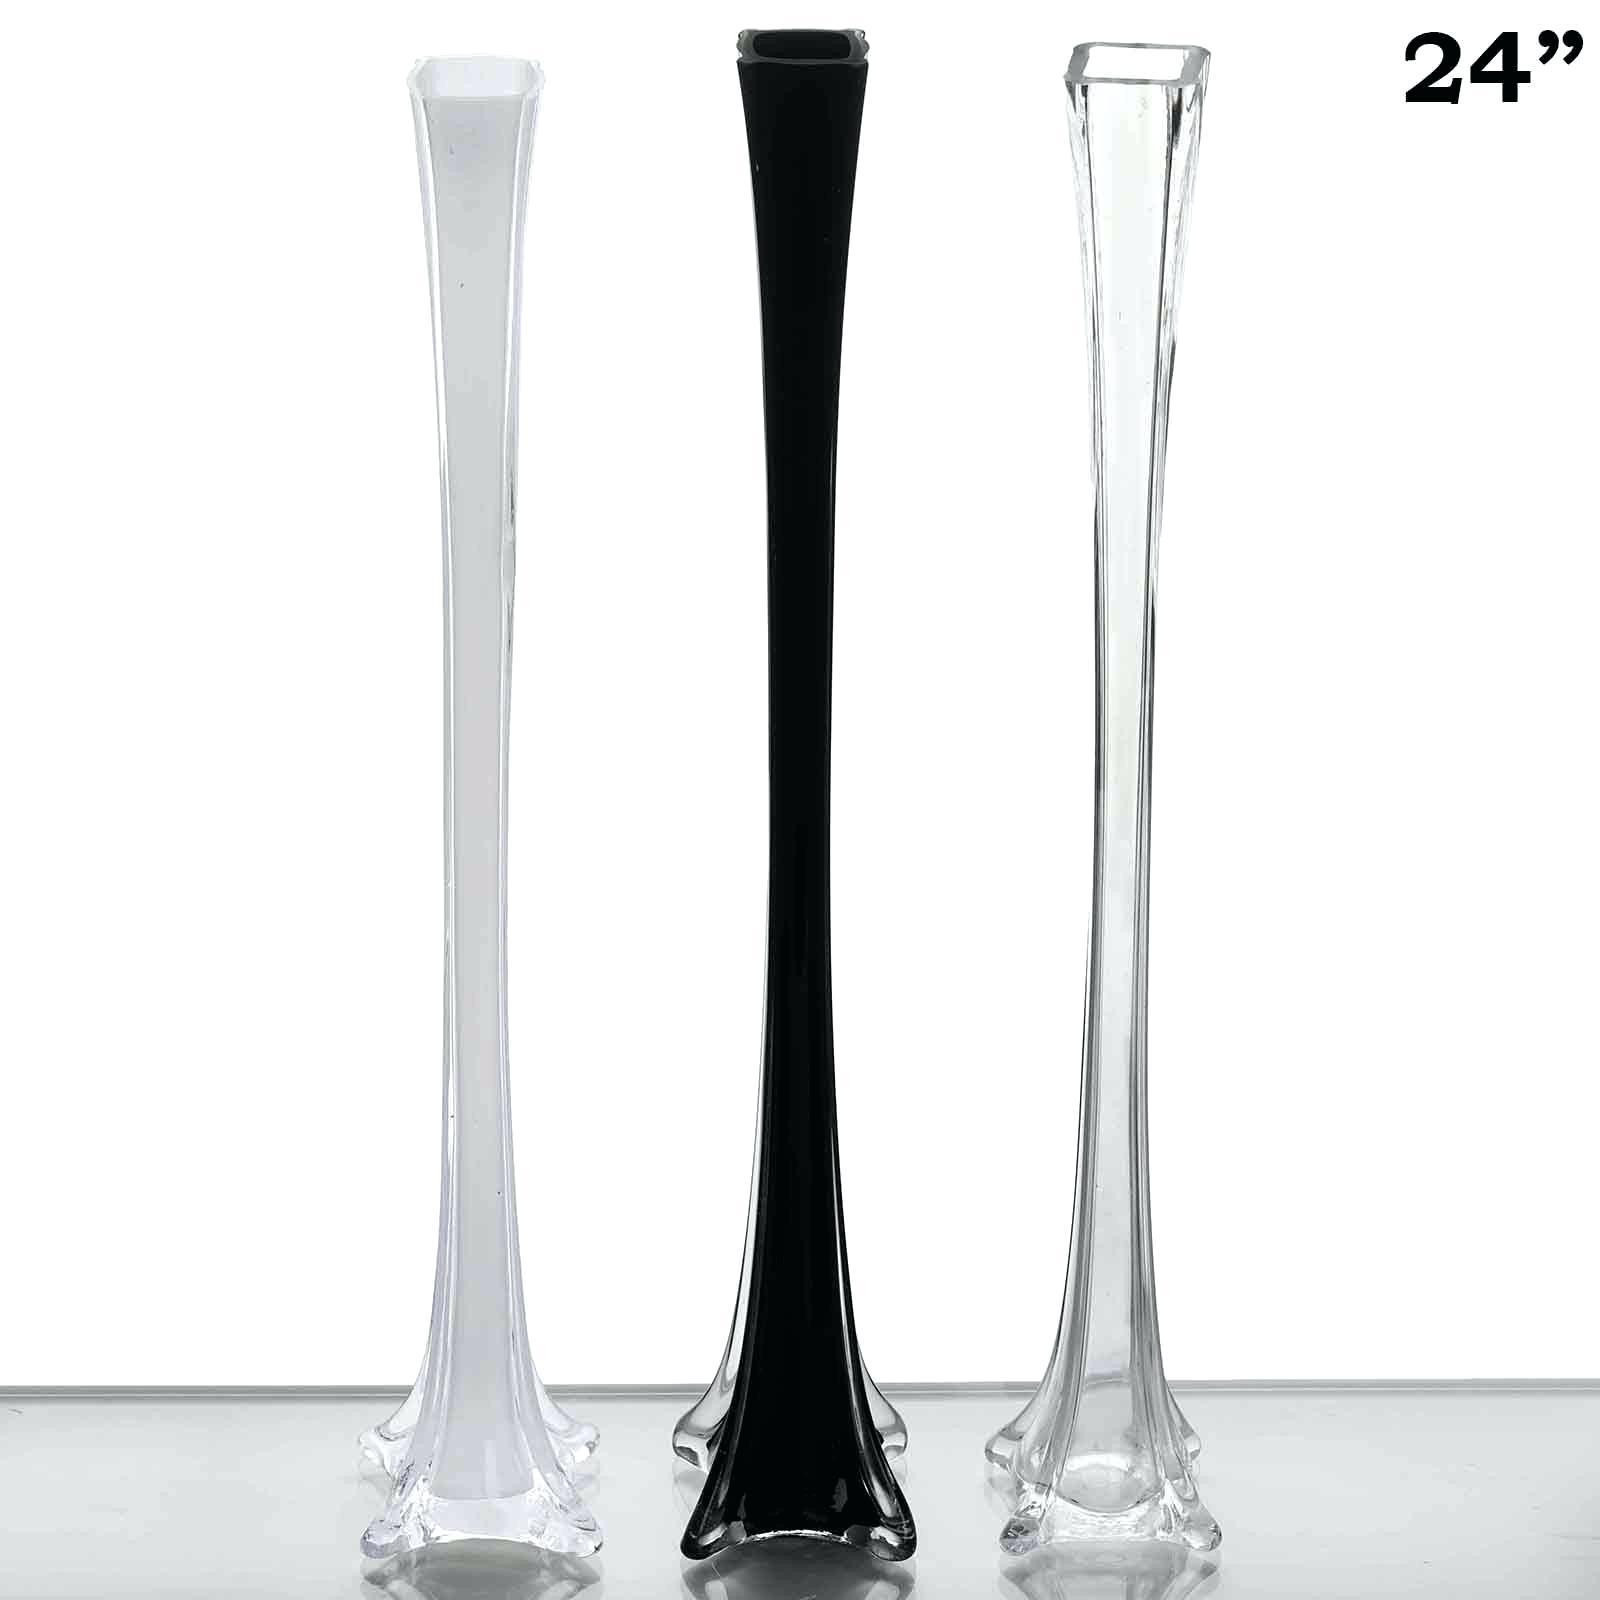 12 Great Cheap Glass Flower Vases wholesale 2023 free download cheap glass flower vases wholesale of fantastic chair decor ideas from living room vases wholesale awesome regarding fantastic chair decor ideas from living room vases wholesale awesome chea